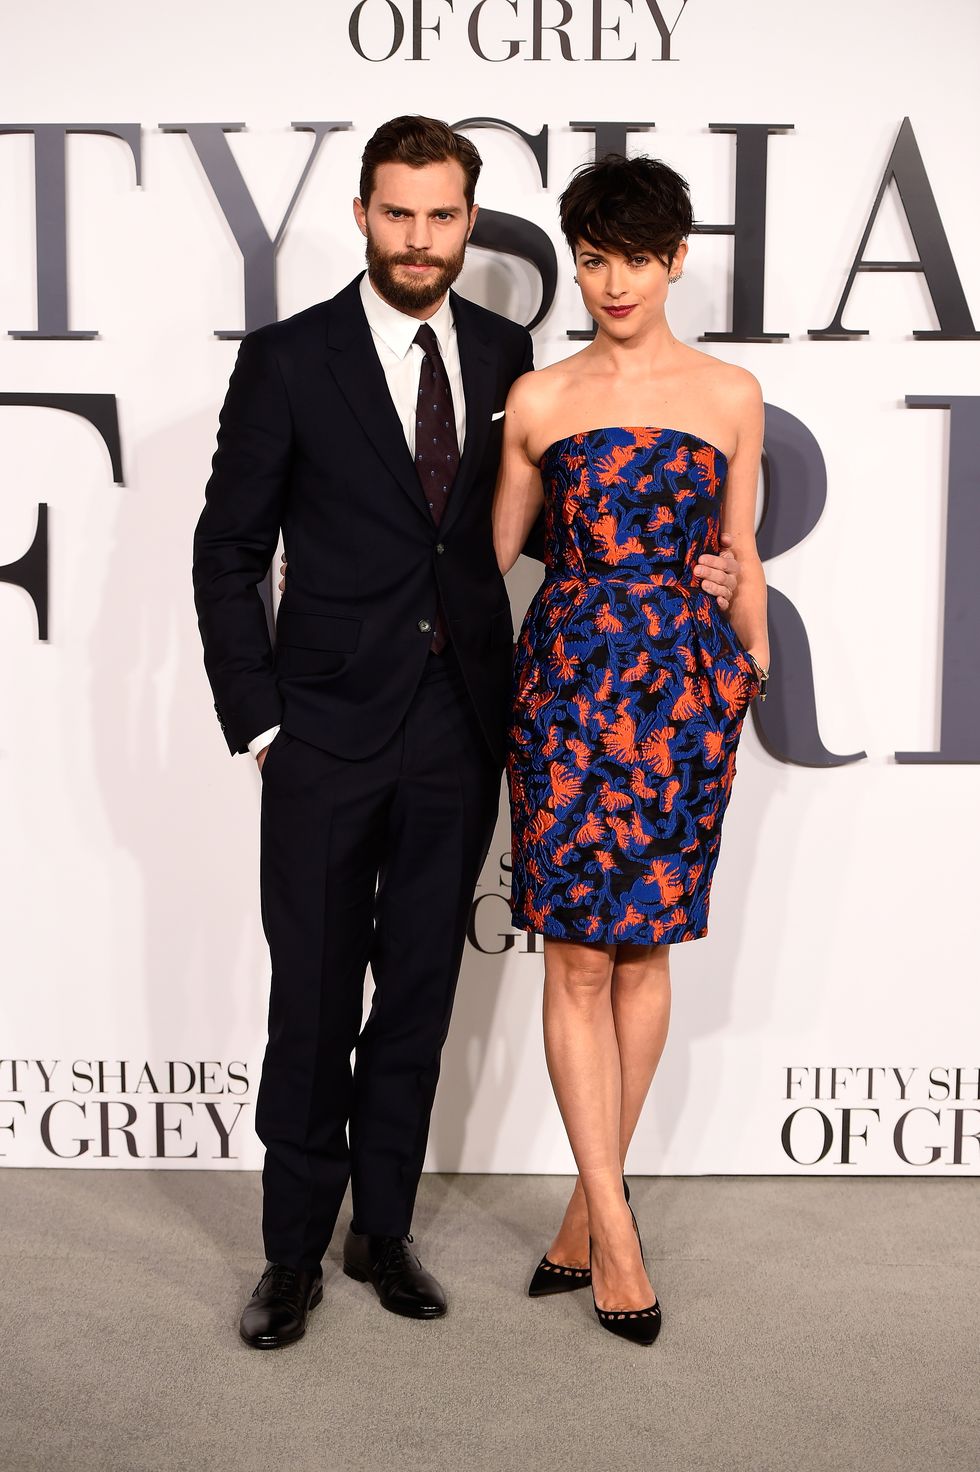 See the 50 Shades of Grey red carpet